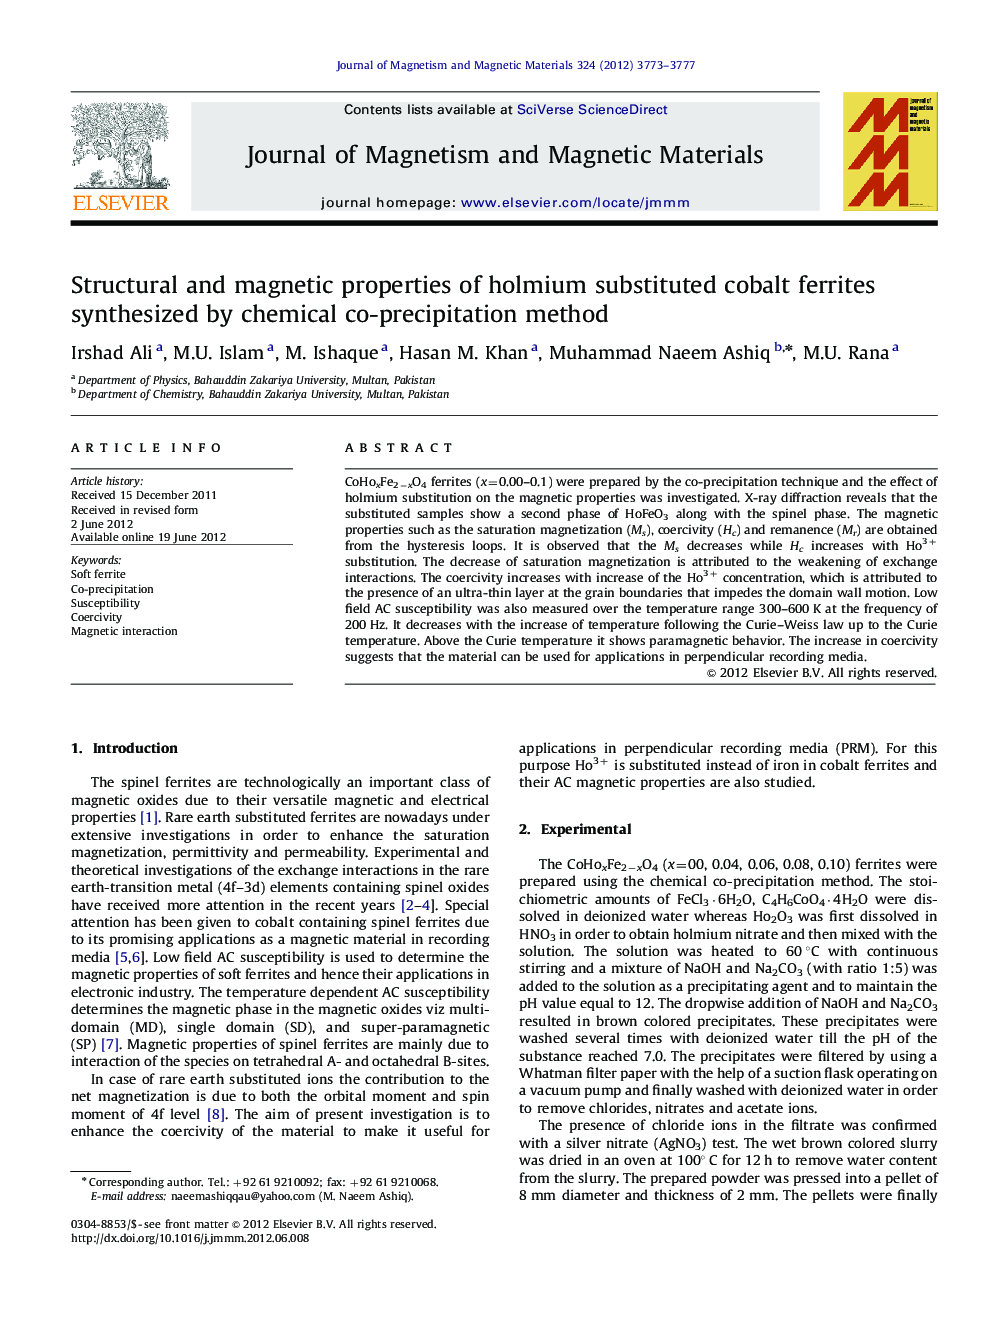 Structural and magnetic properties of holmium substituted cobalt ferrites synthesized by chemical co-precipitation method